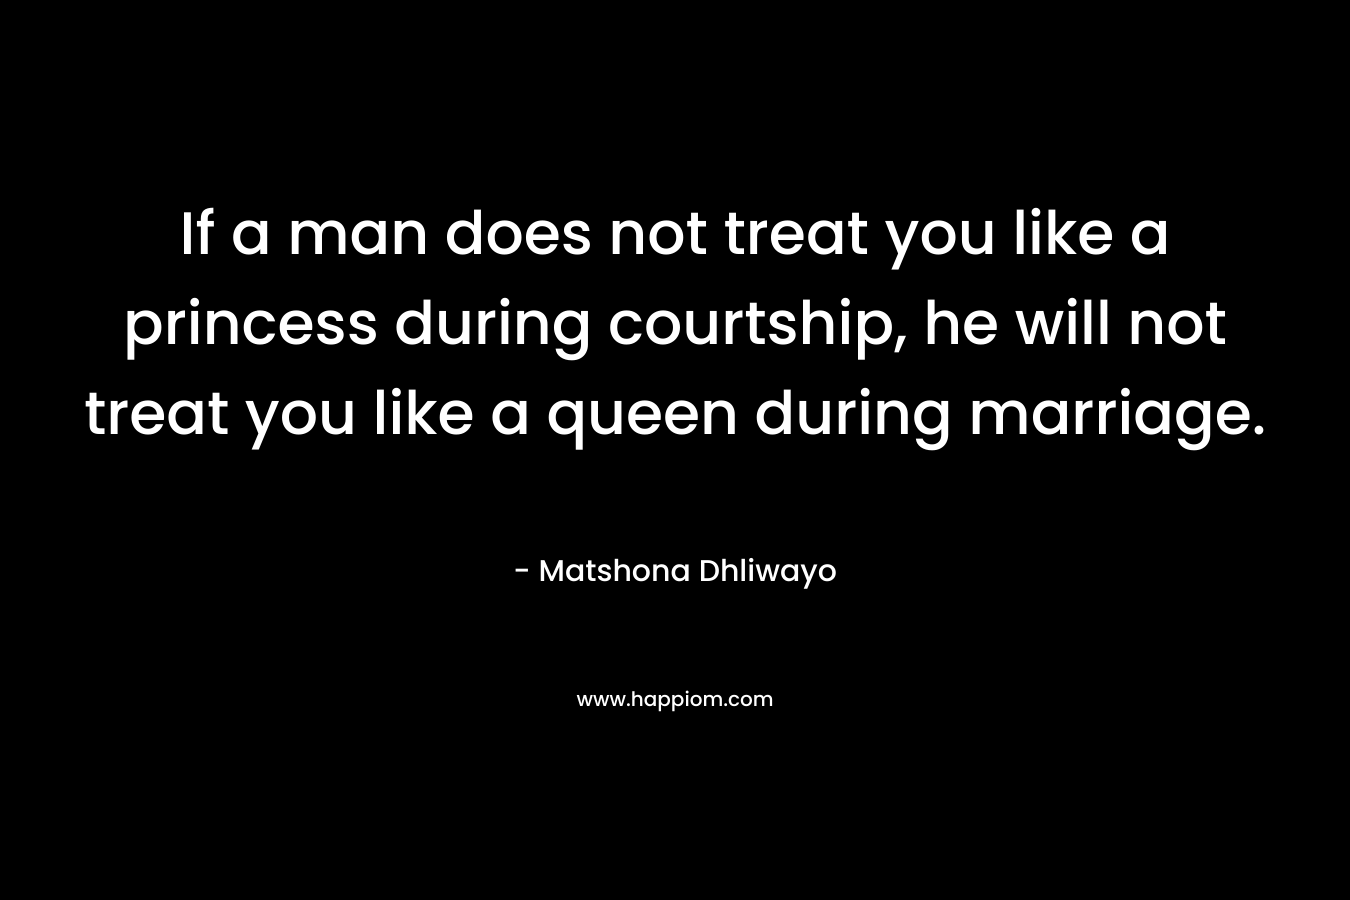 If a man does not treat you like a princess during courtship, he will not treat you like a queen during marriage. – Matshona Dhliwayo